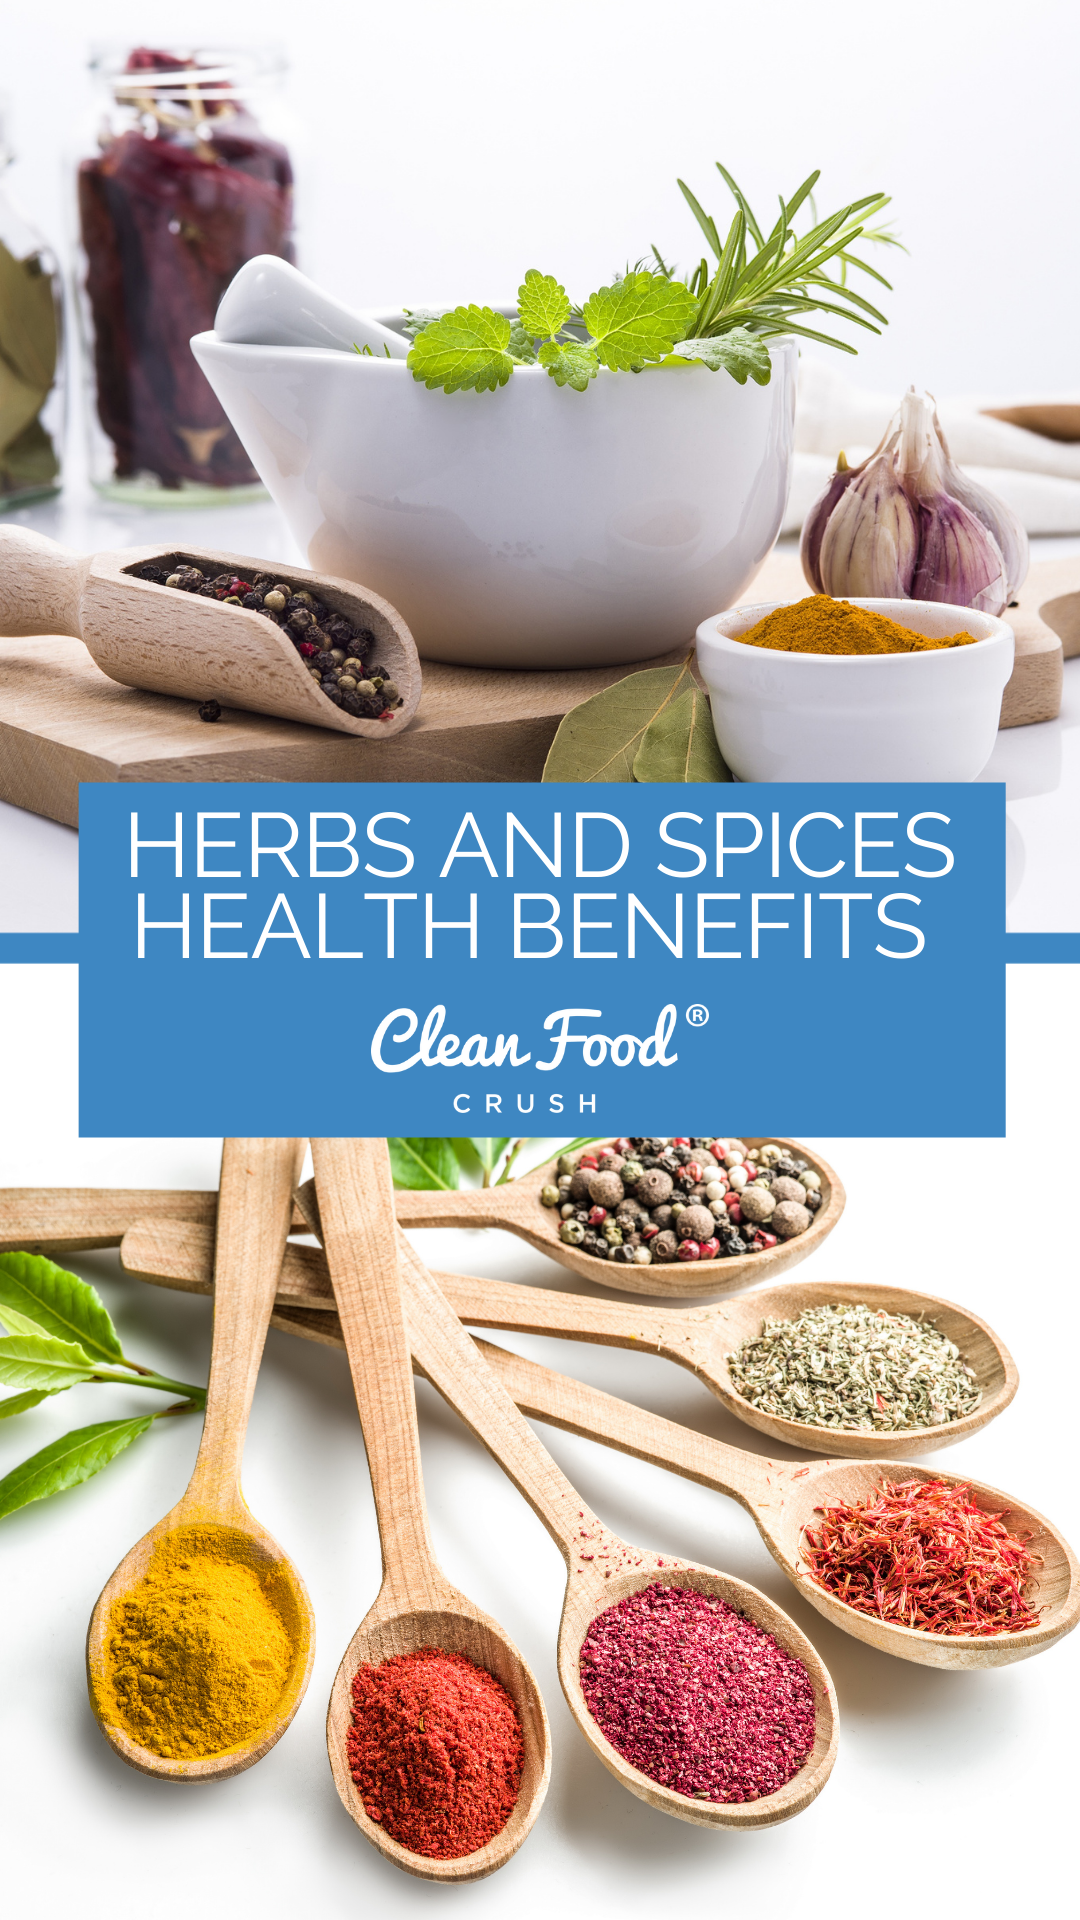 Nutritional Benefits of Herbs and Spices